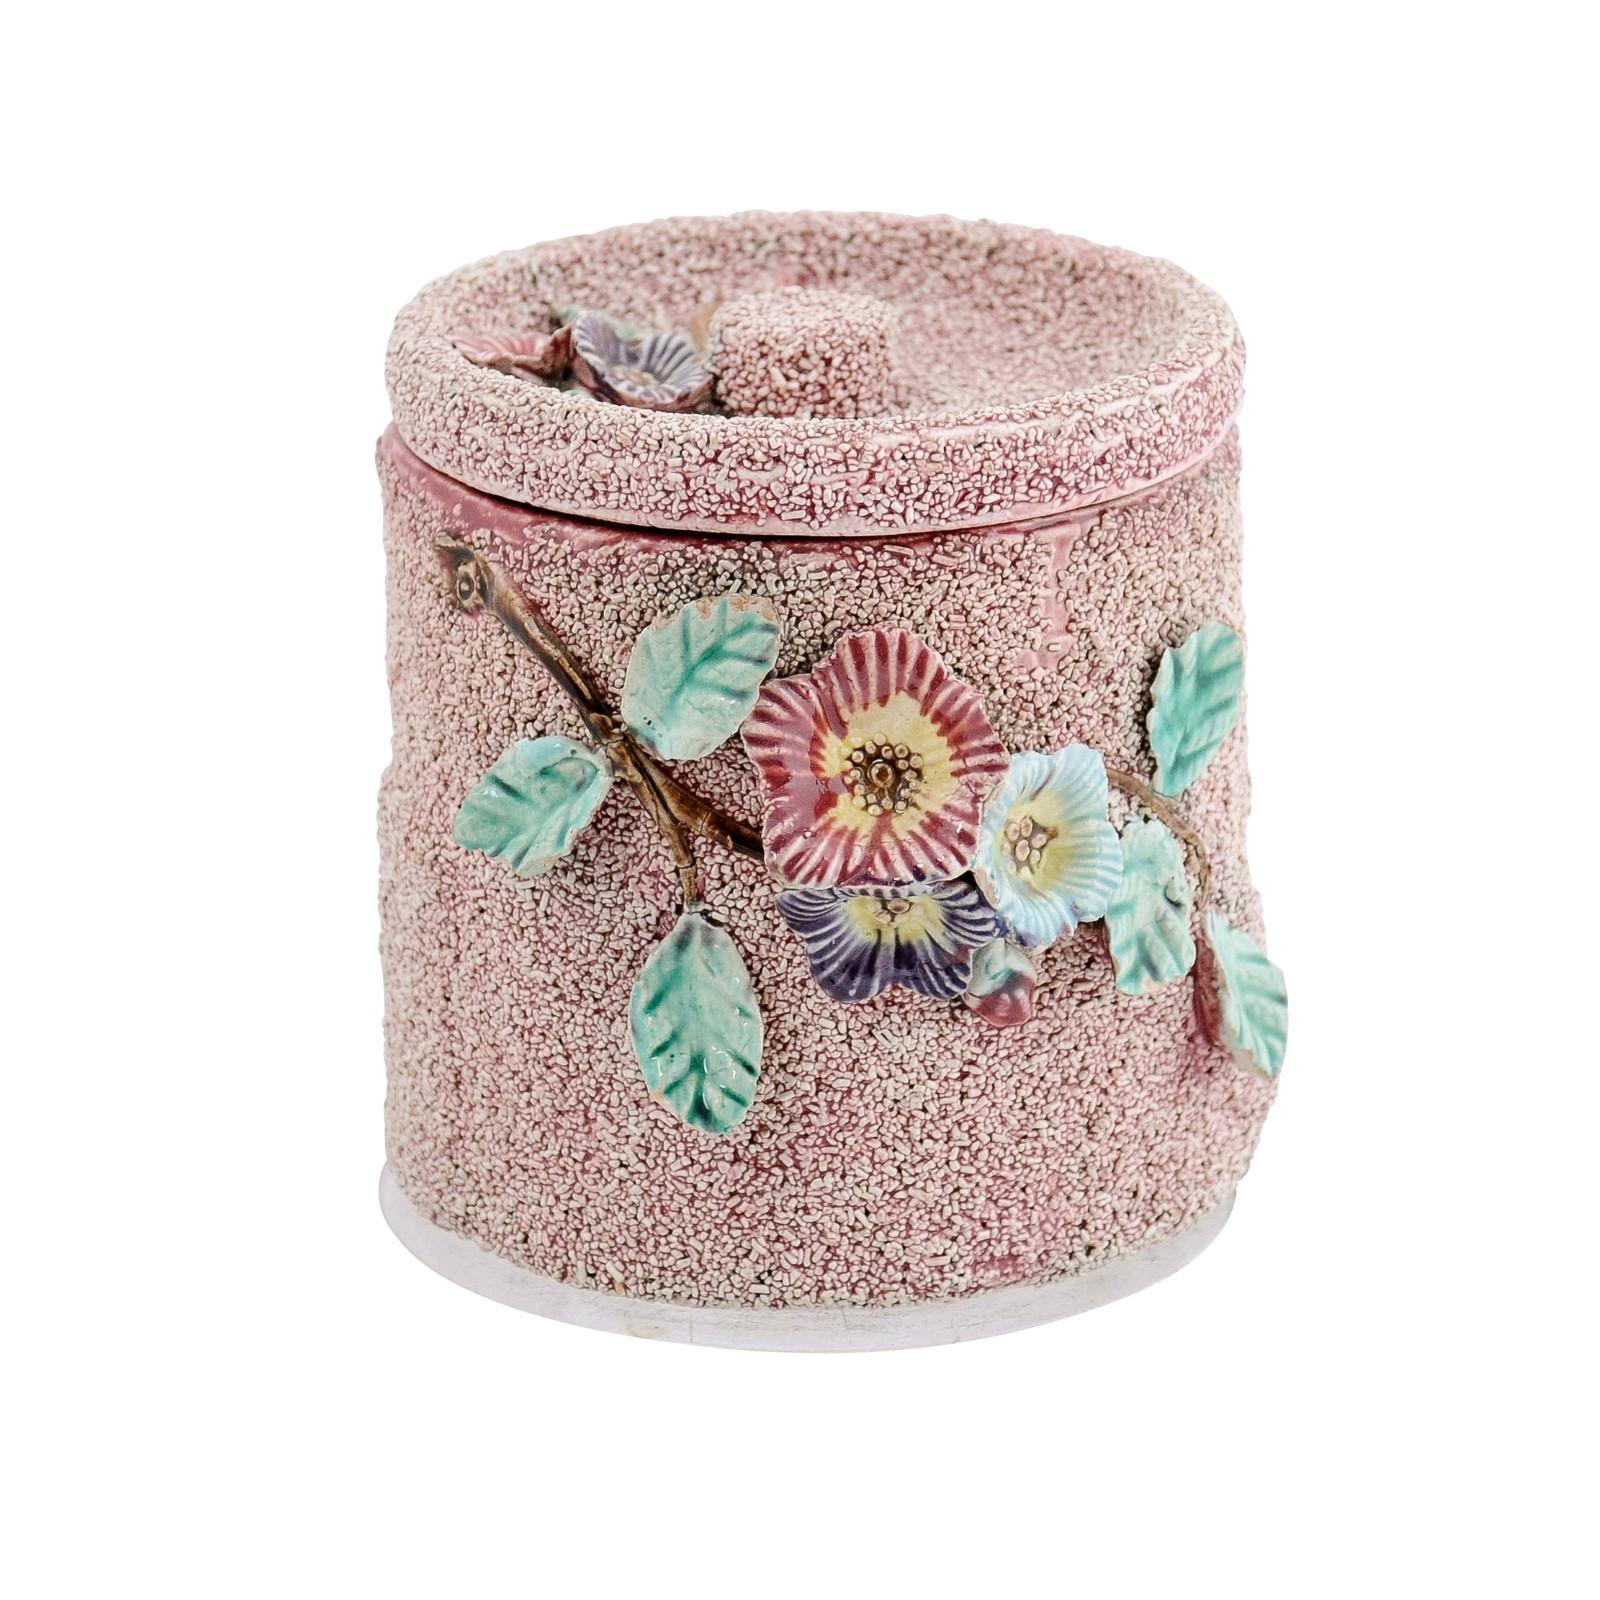 English 20th Century Pottery Box with Floral Motifs, Textured Ground and Lid For Sale